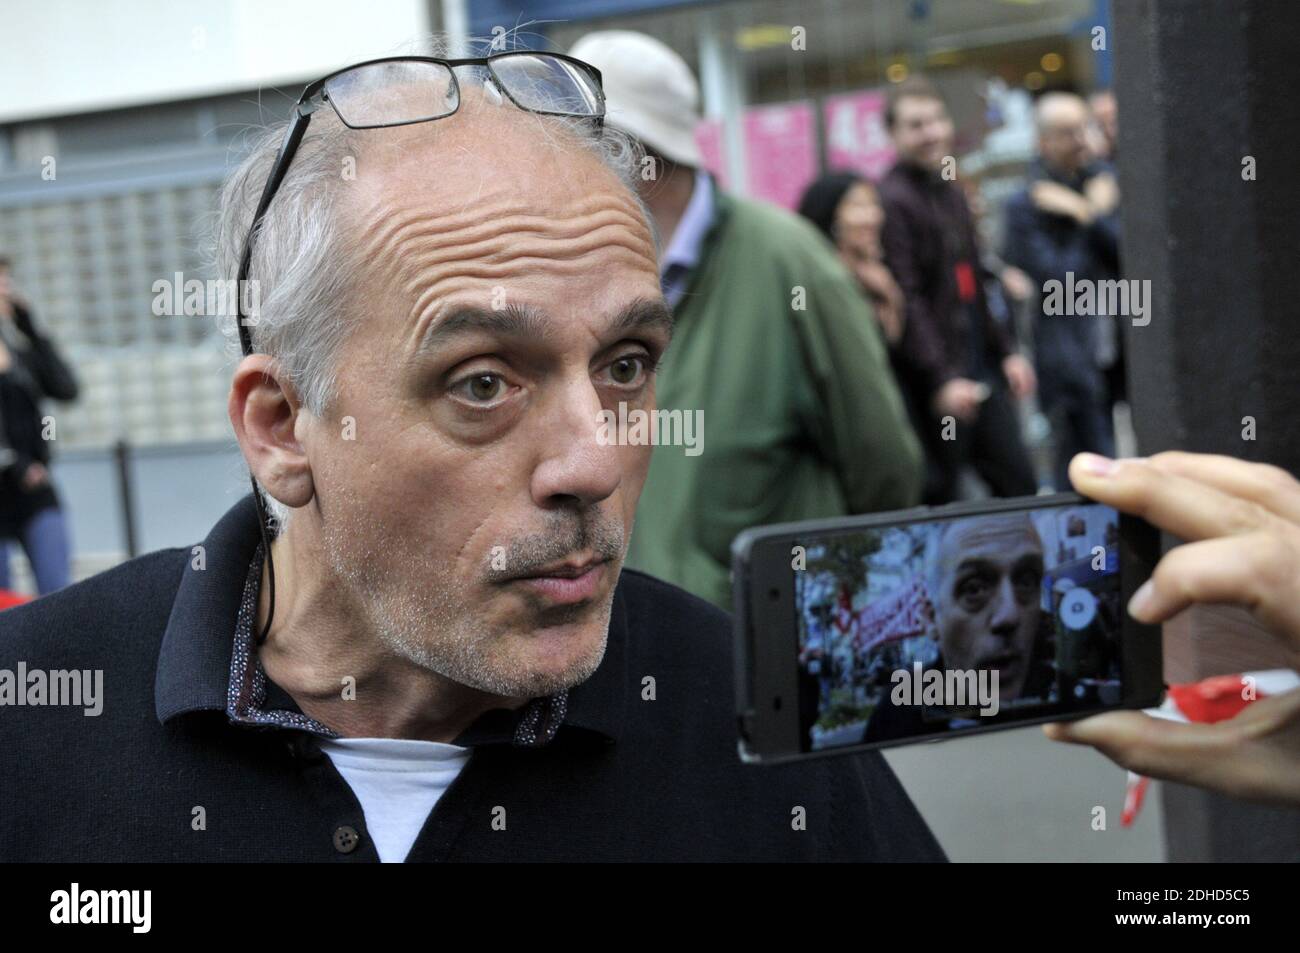 NPA 's Philippe Poutou at the French public sector workers strike and protest against Macron in Paris, France on October 10, 2017. Photo by Alain Apaydin/ABACAPRESS.COM Stock Photo